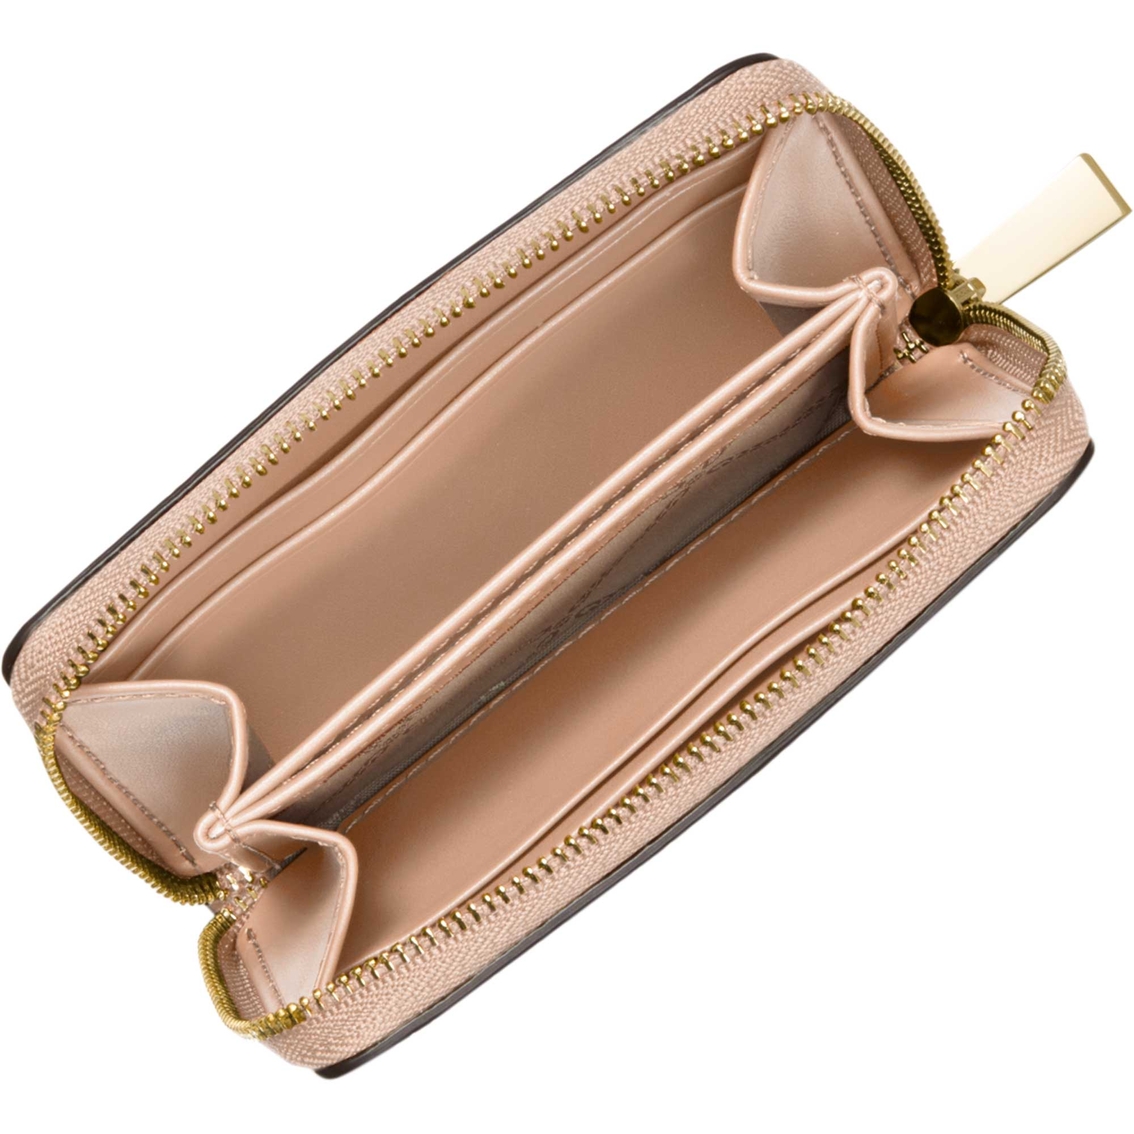 Michael Kors Zip Around Leather Card Case - Image 3 of 3